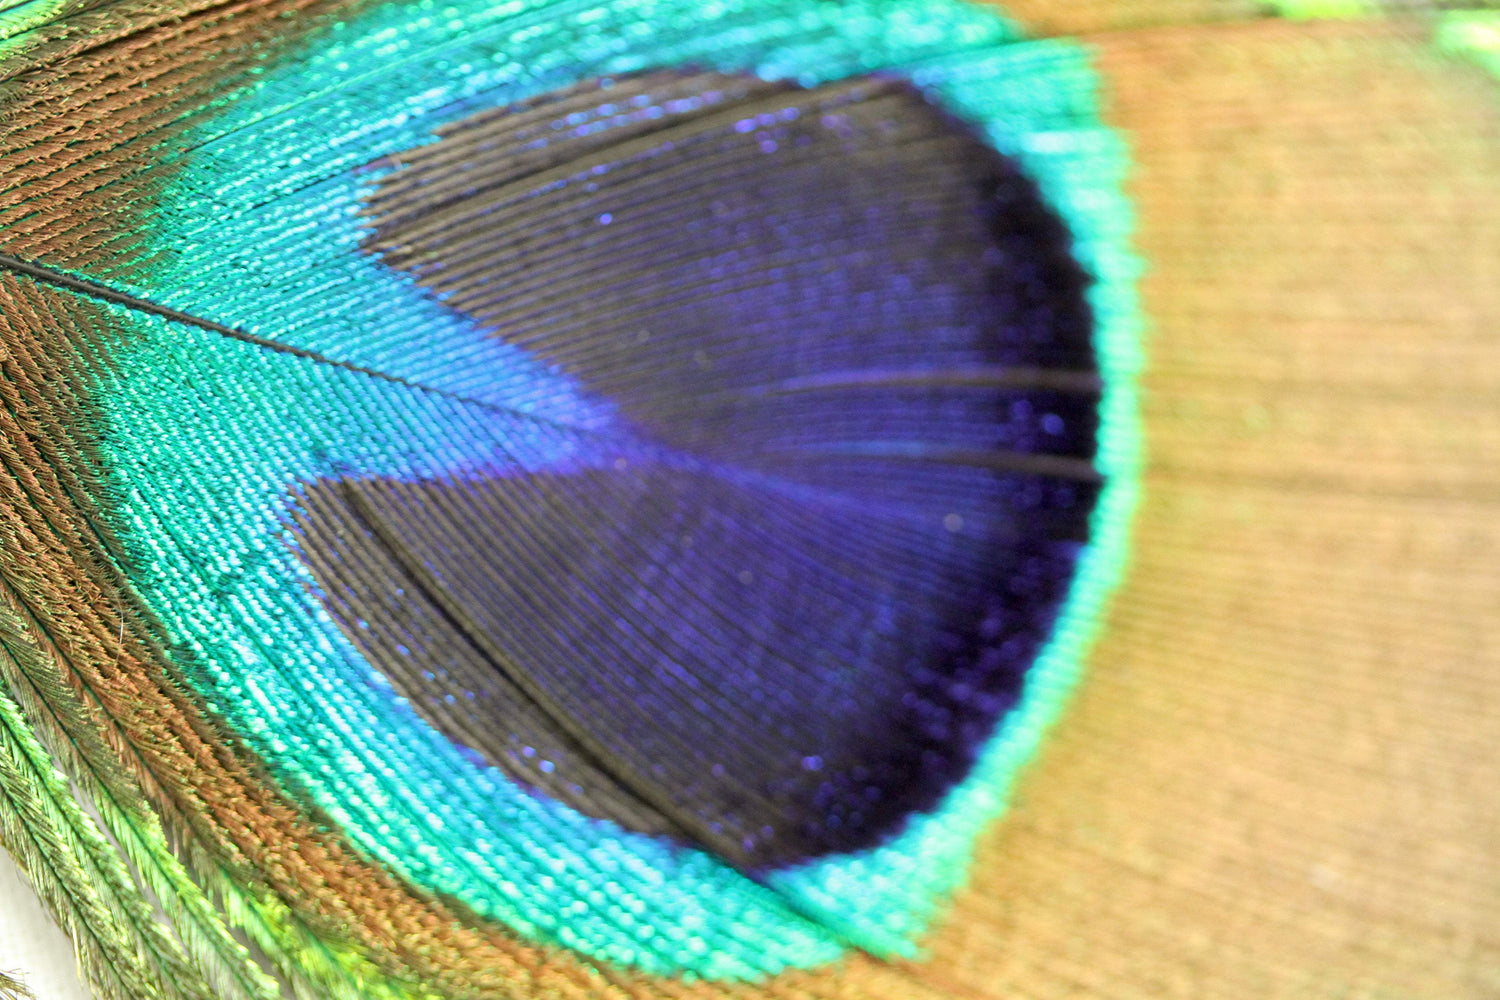 Peacock Feather Fringe